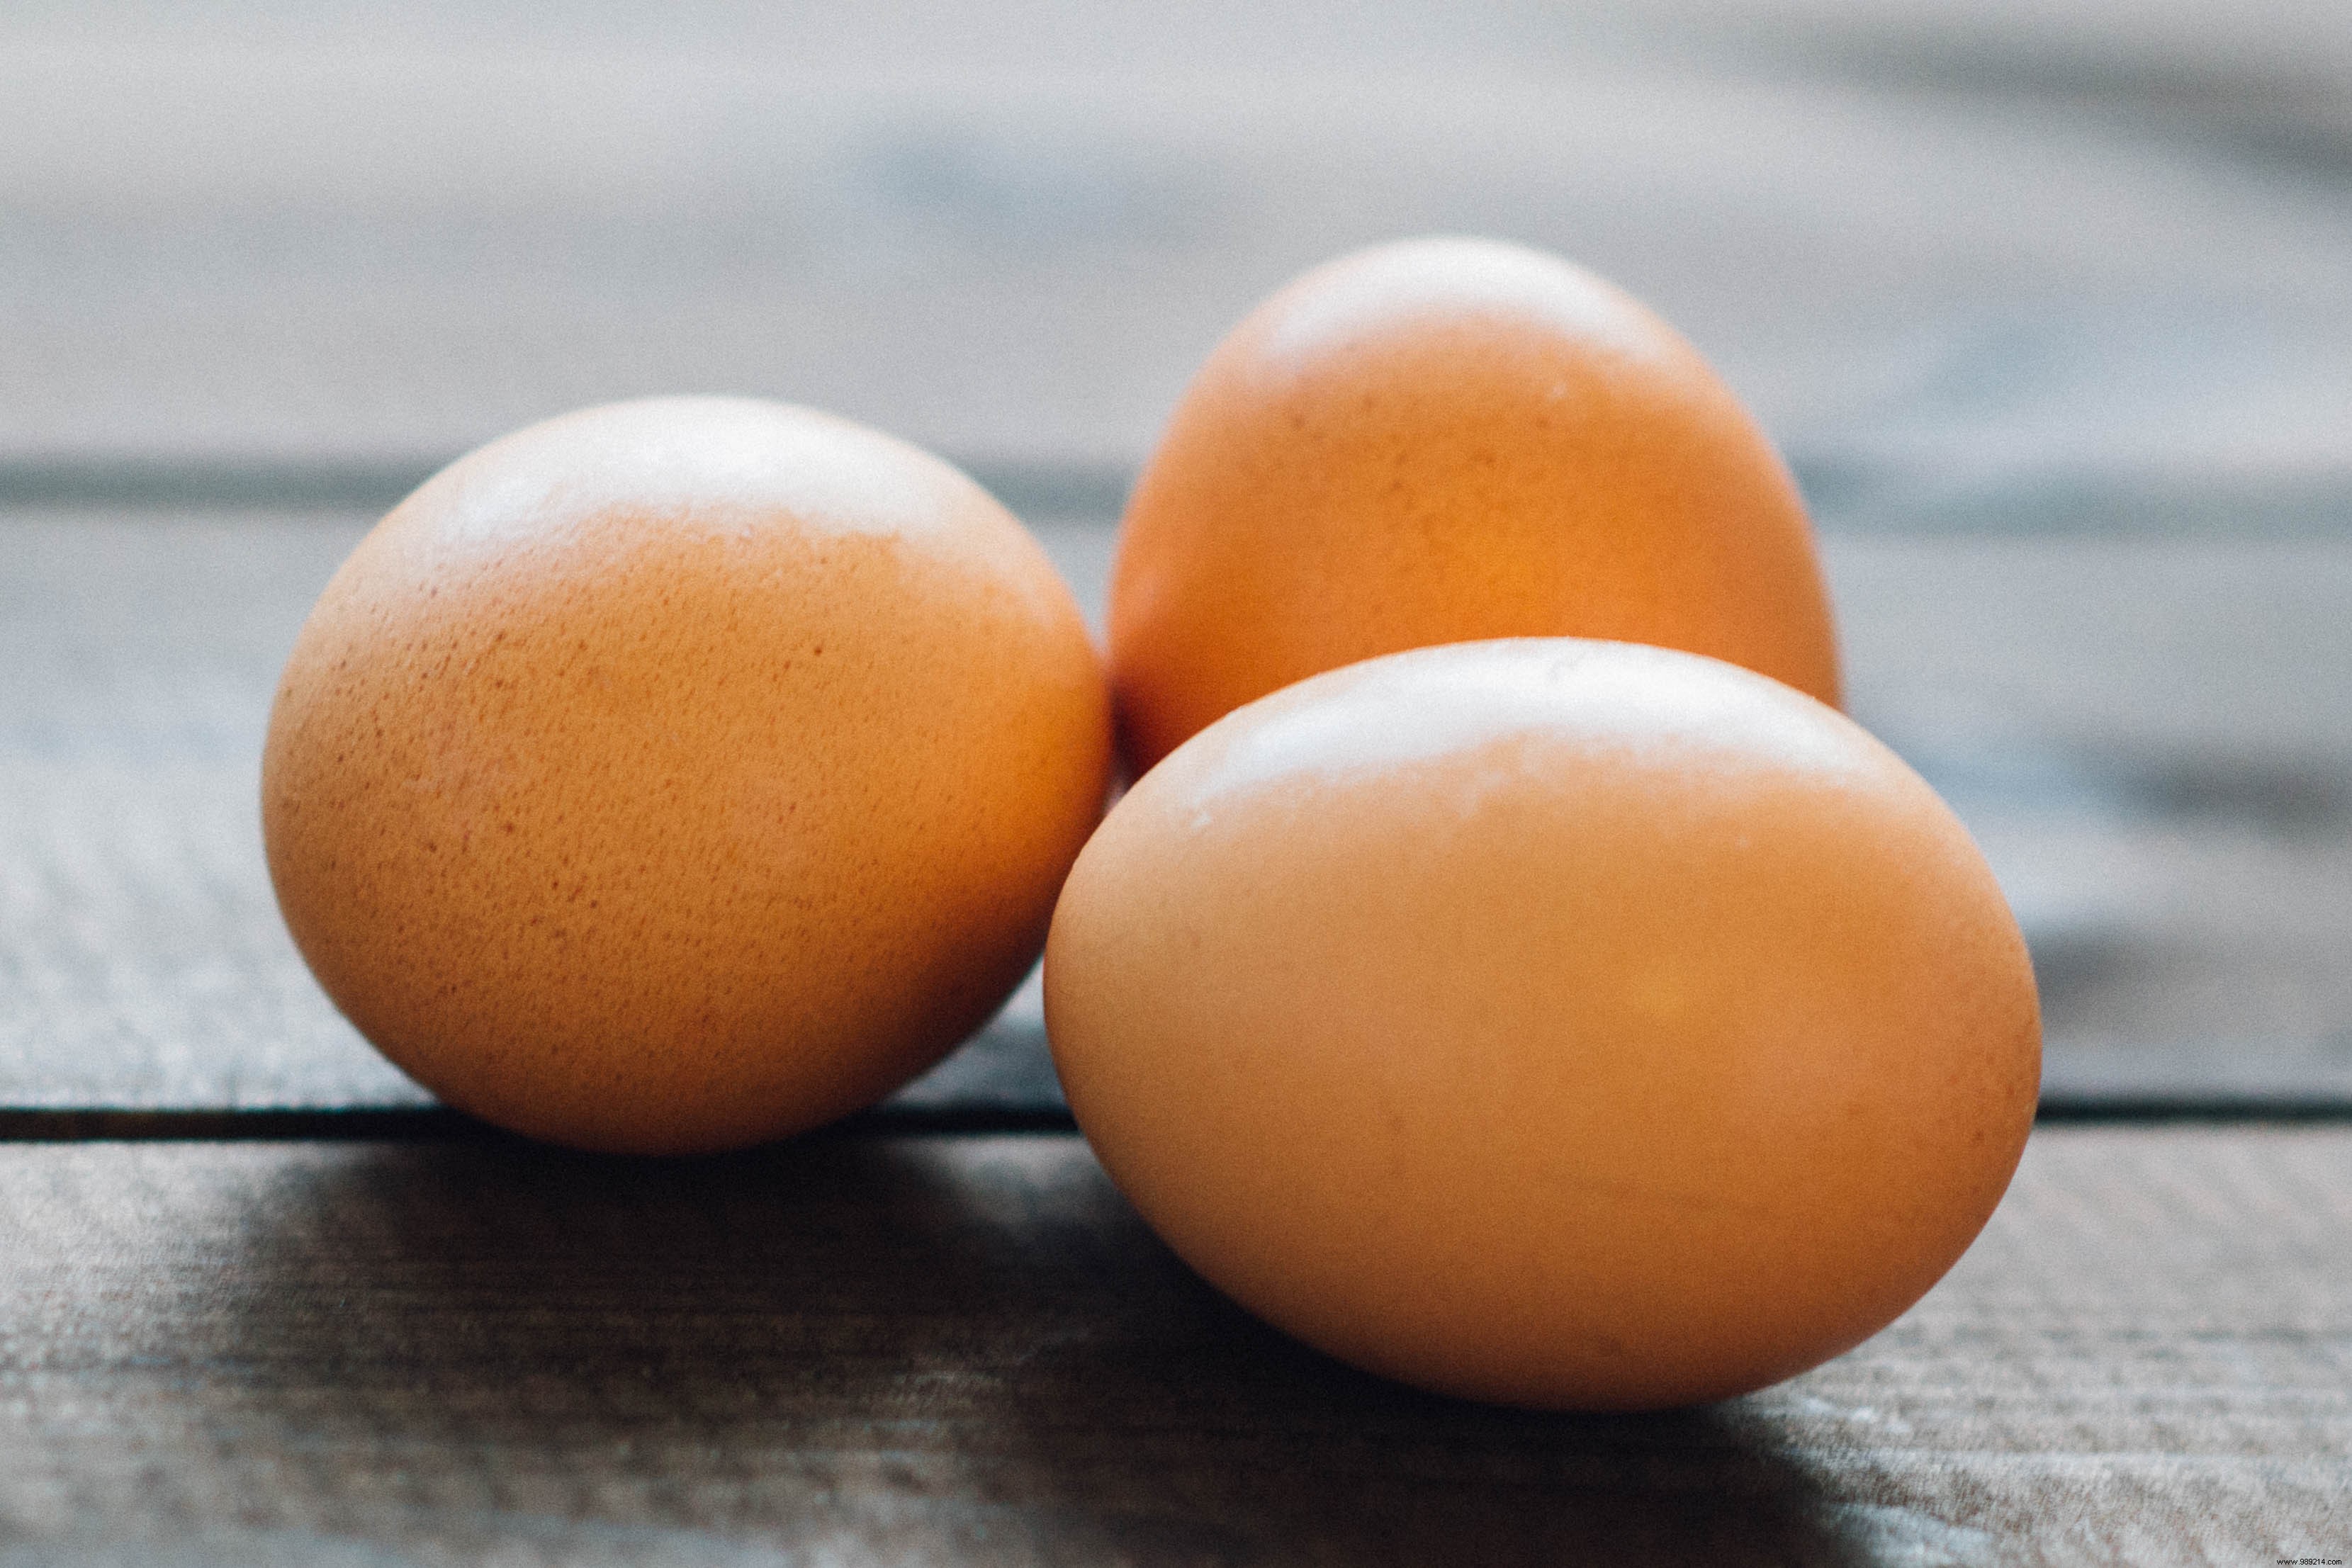 Does eating eggs increase the risk of heart disease? 